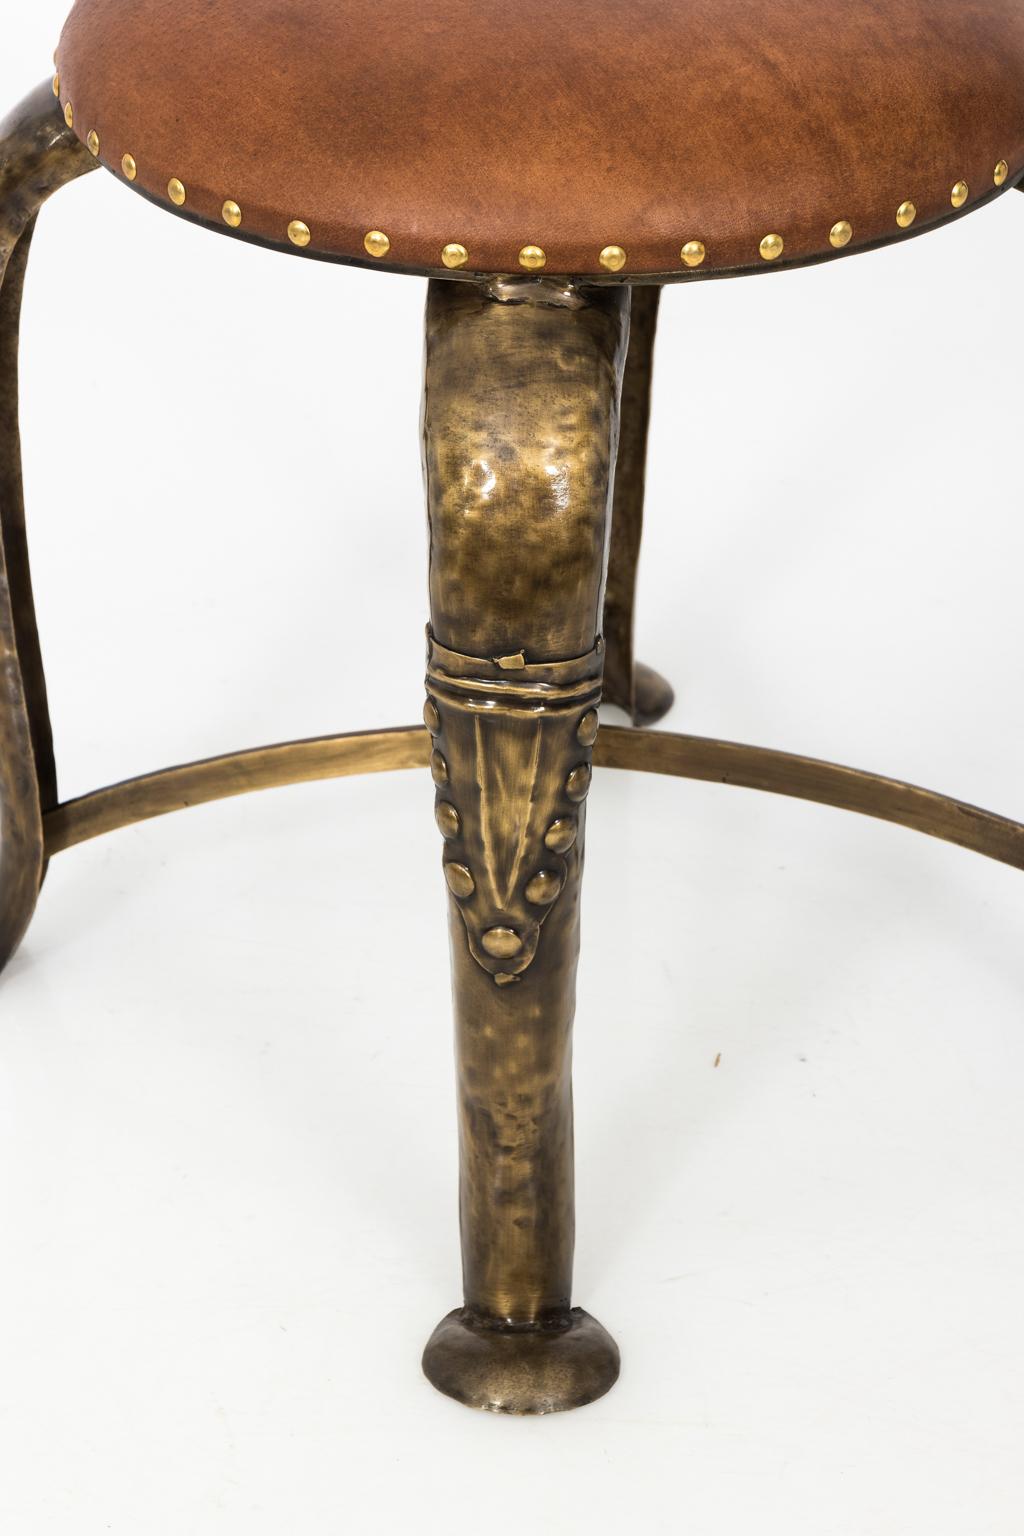 Leather top stool on metal base in brass antiqued finish.